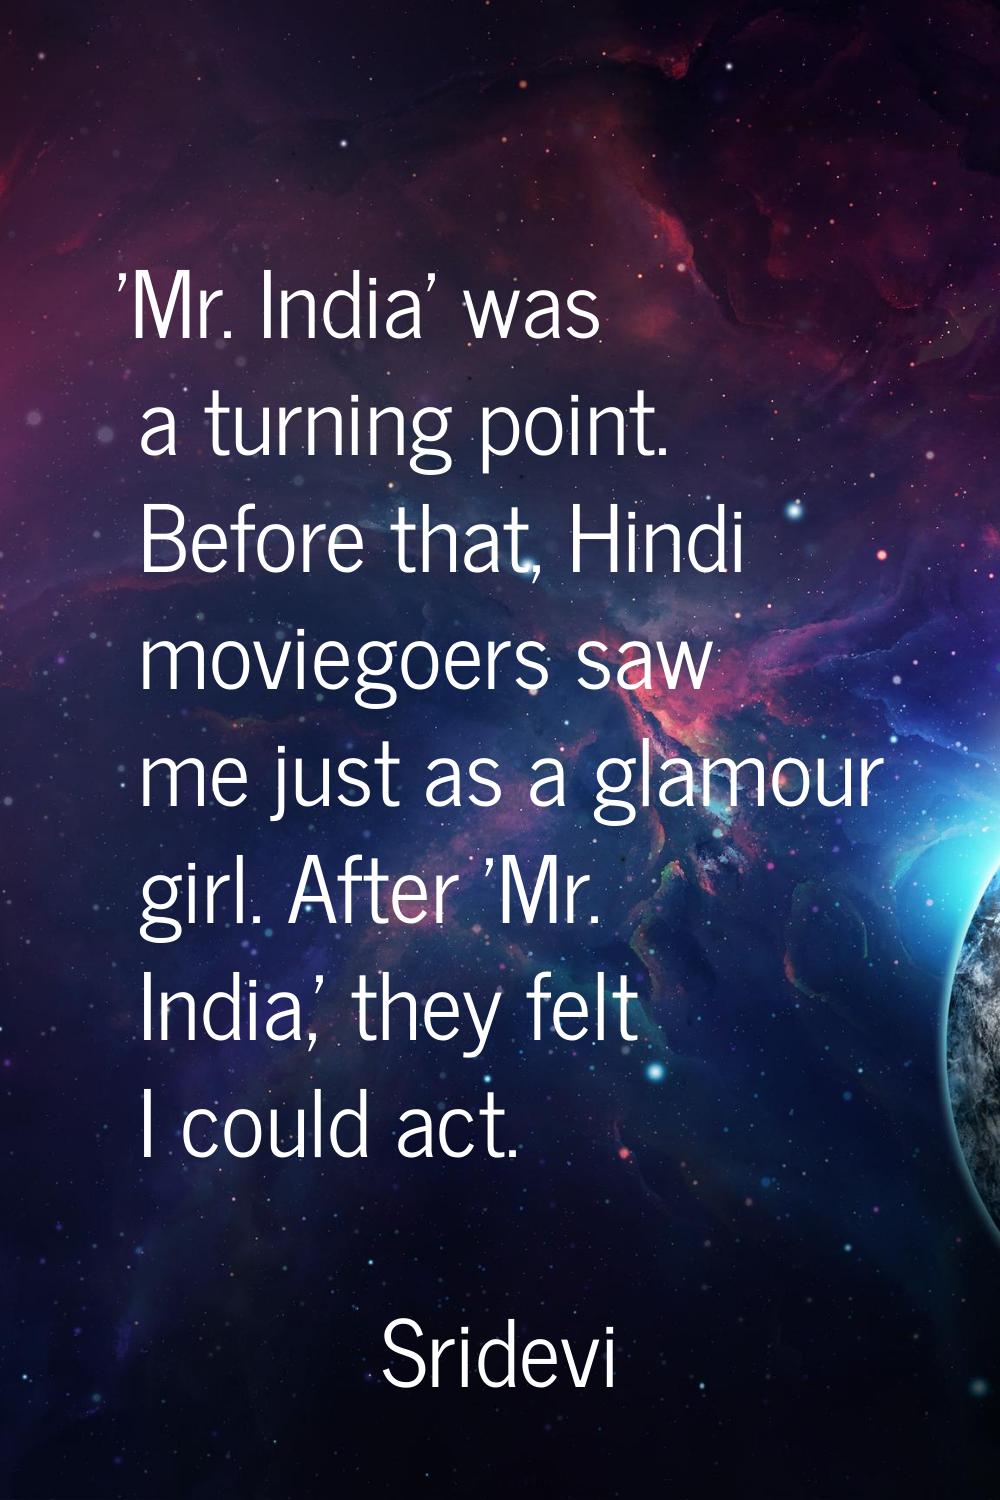 'Mr. India' was a turning point. Before that, Hindi moviegoers saw me just as a glamour girl. After